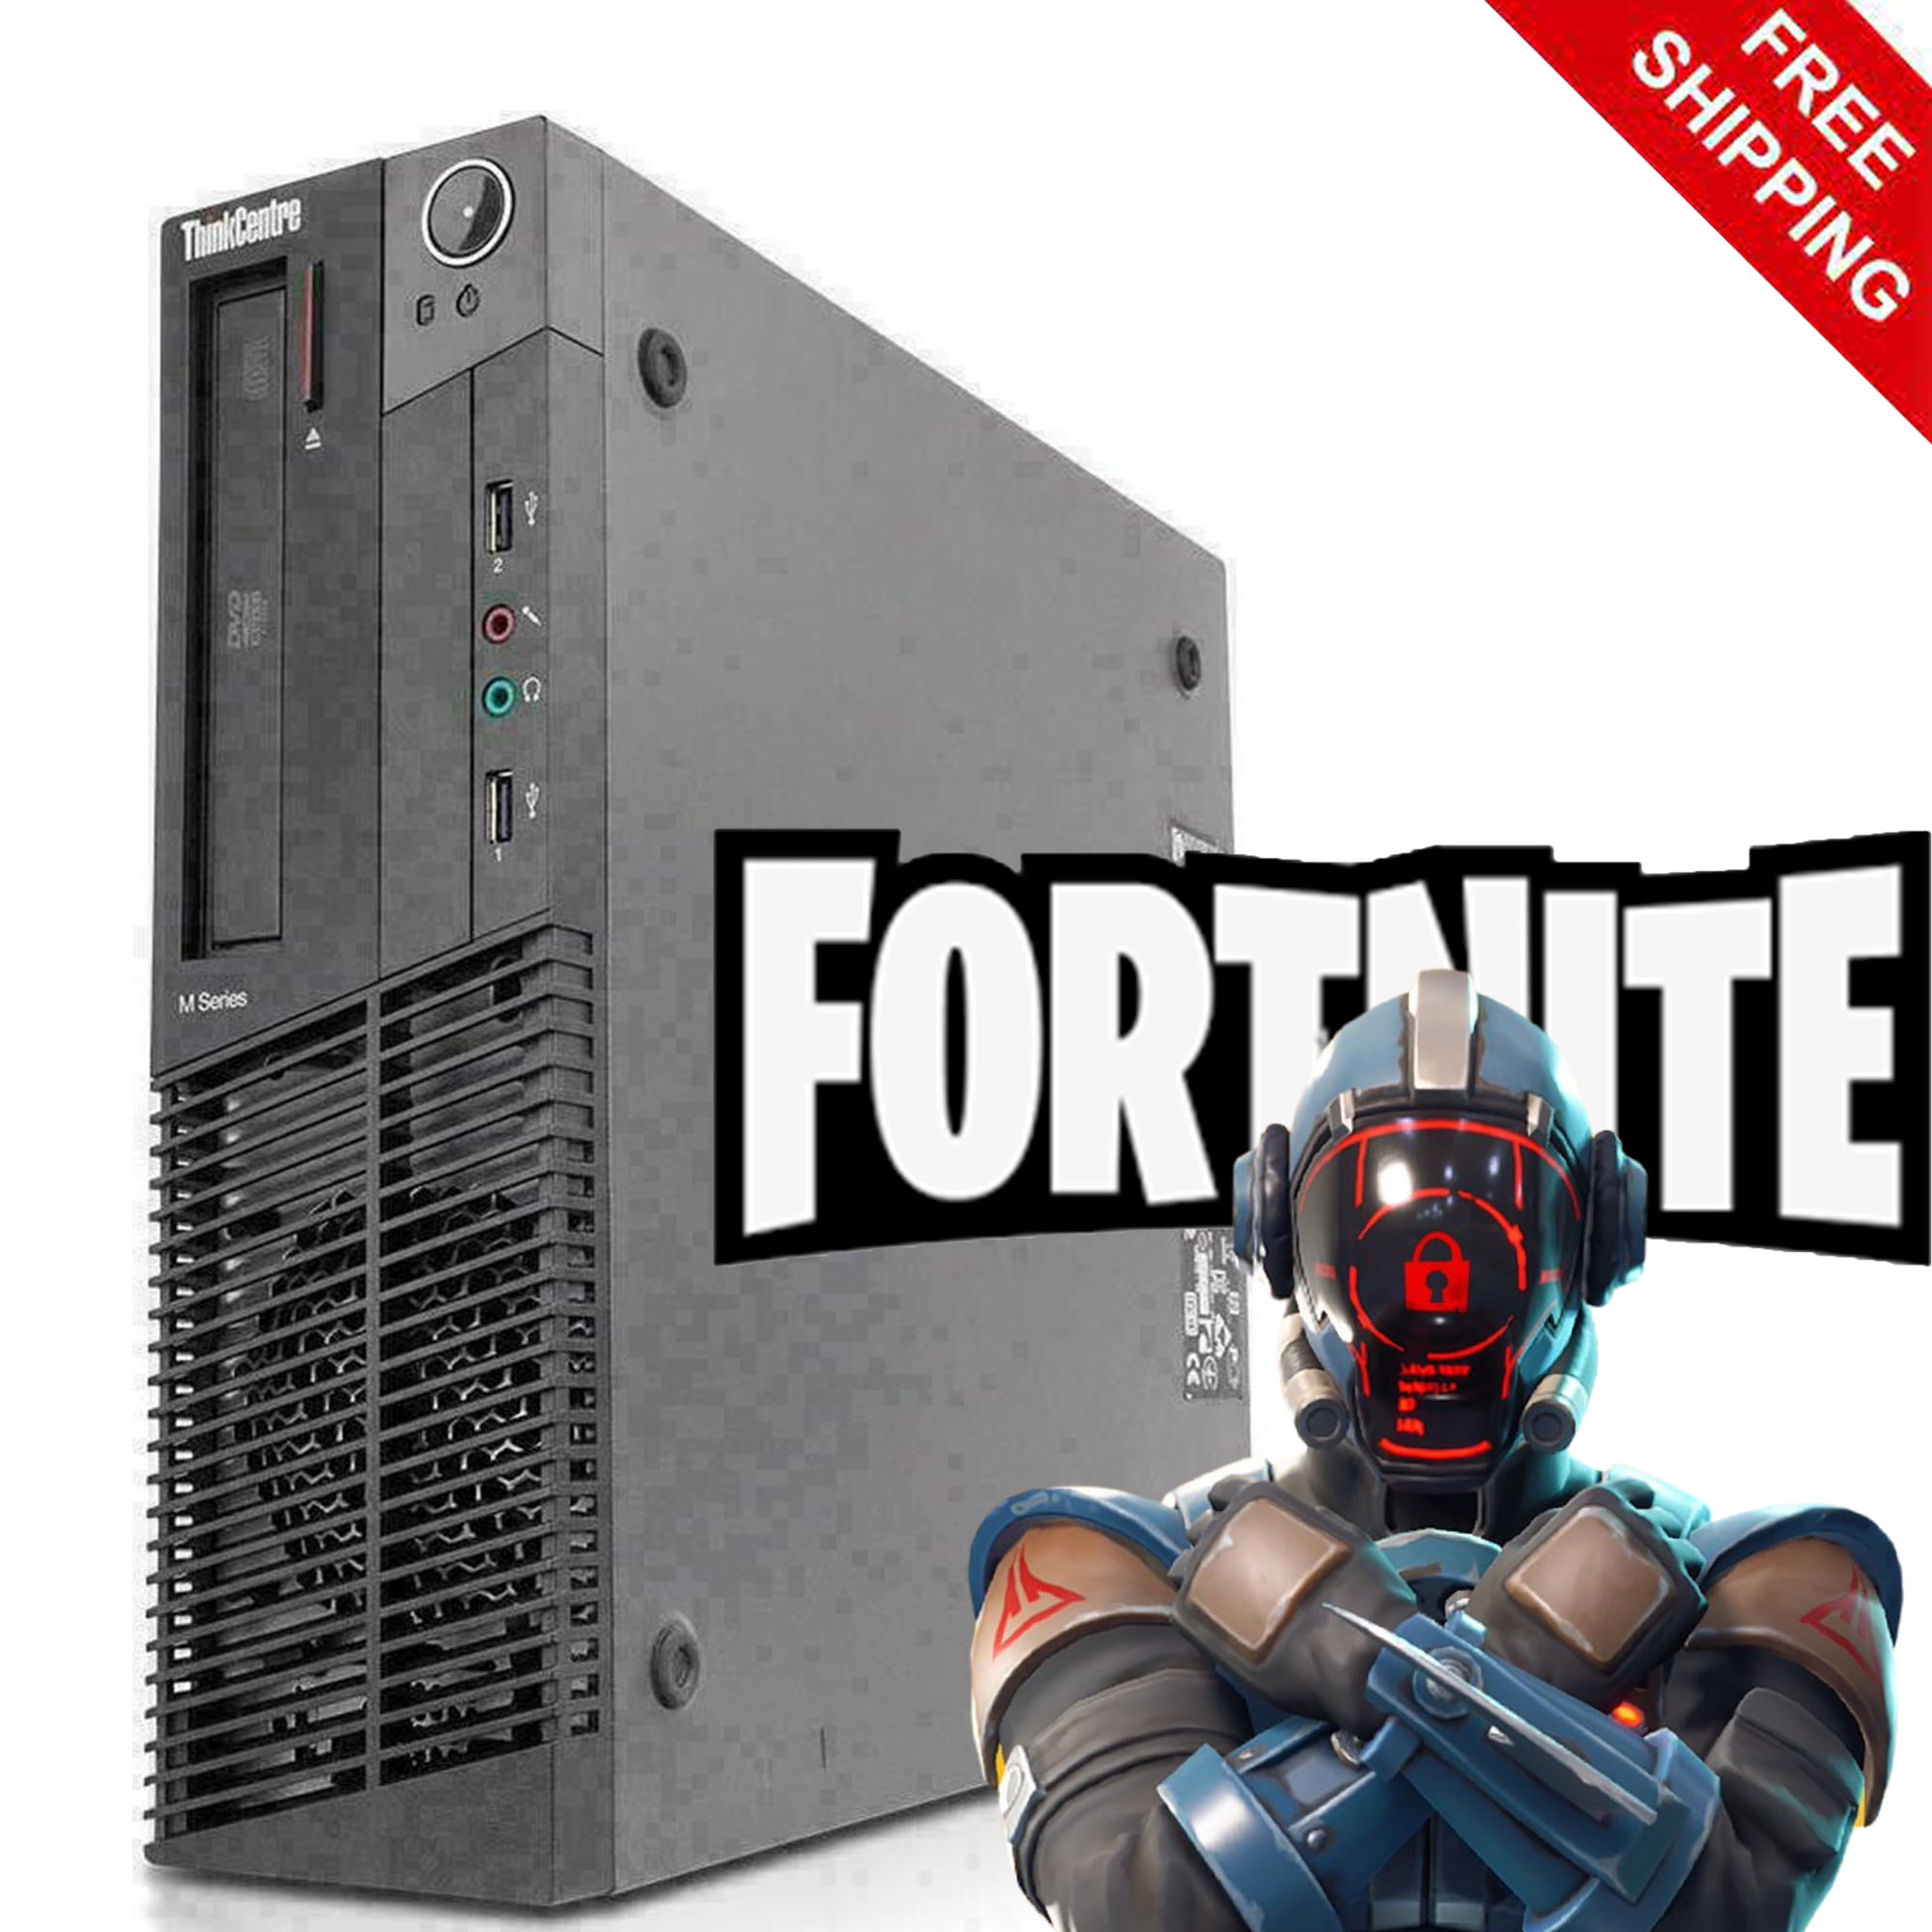 Lenovo Gaming Tower Computer PC 8GB 1TB For Fortnite Gaming Windows 10 Pro  Pro